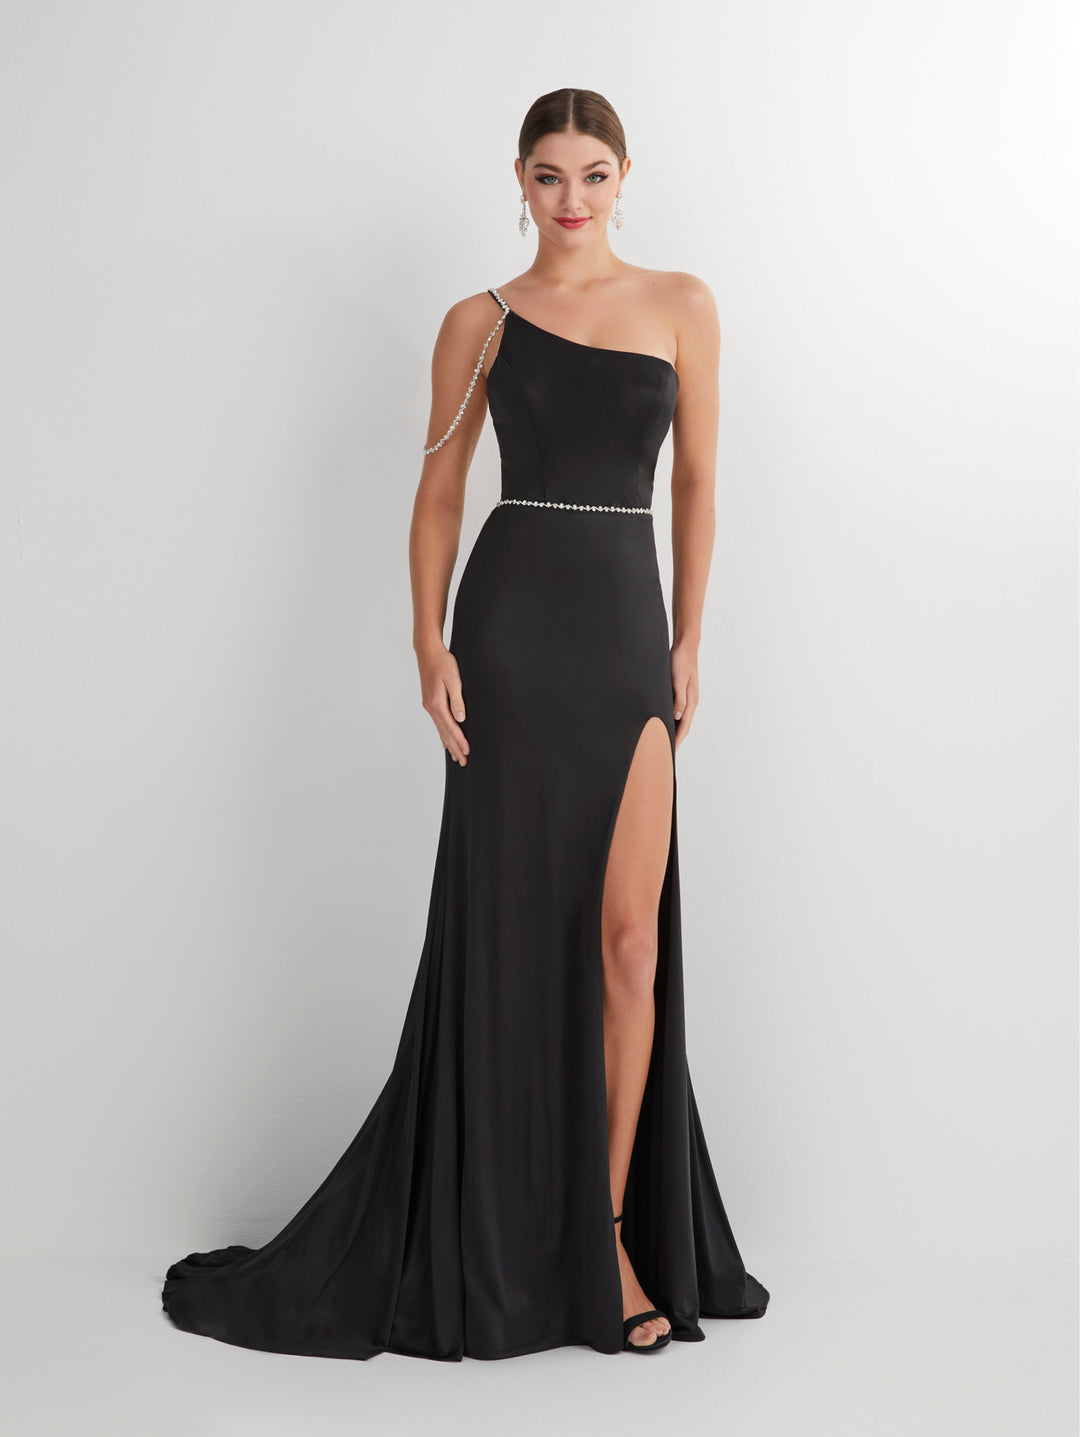 Beaded Jersey One Shoulder Slit Gown by Studio 17 12887